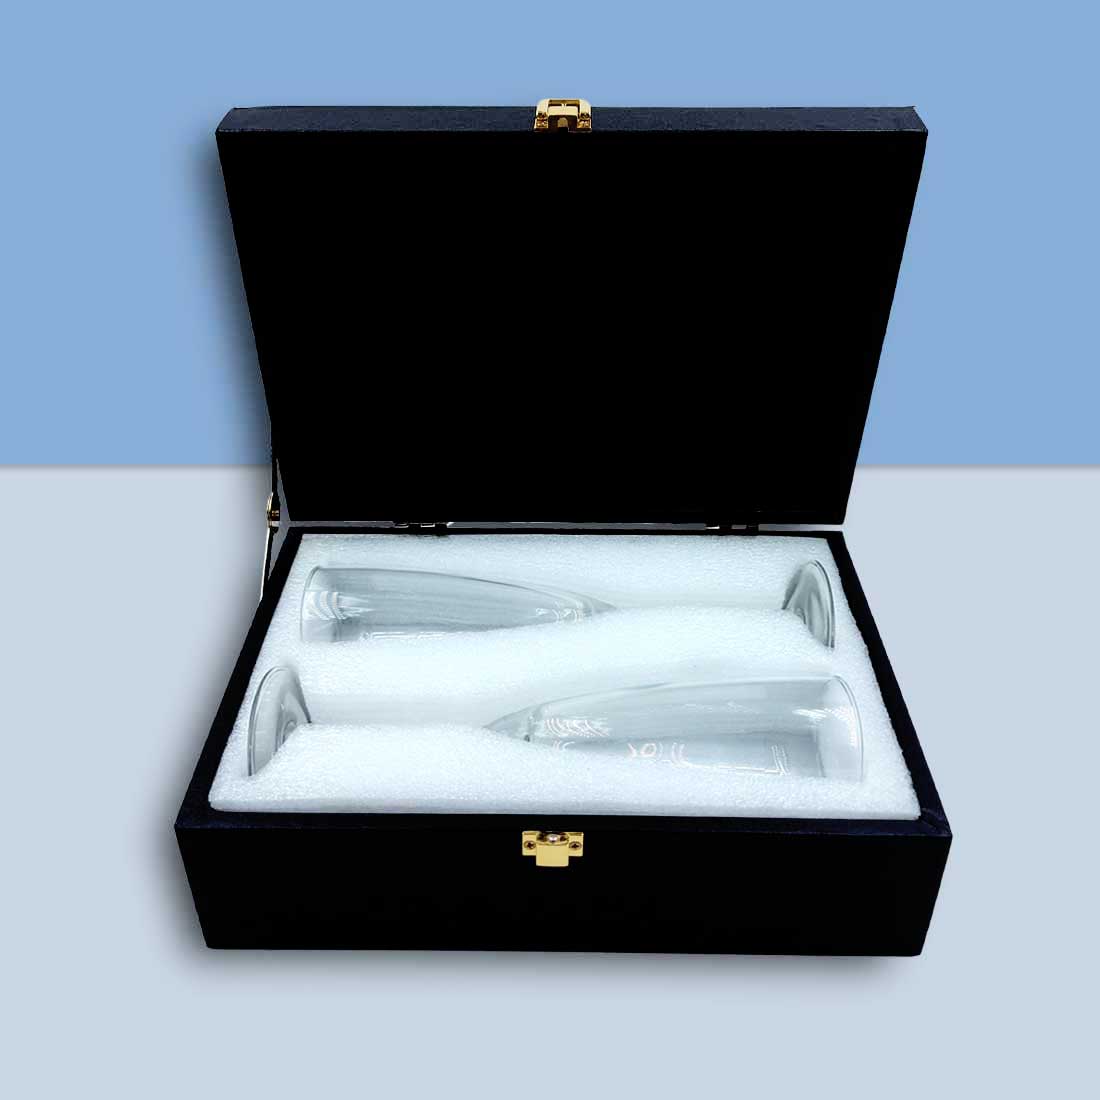 Anniversary Gift Box Champagne Glass Set Available in Black